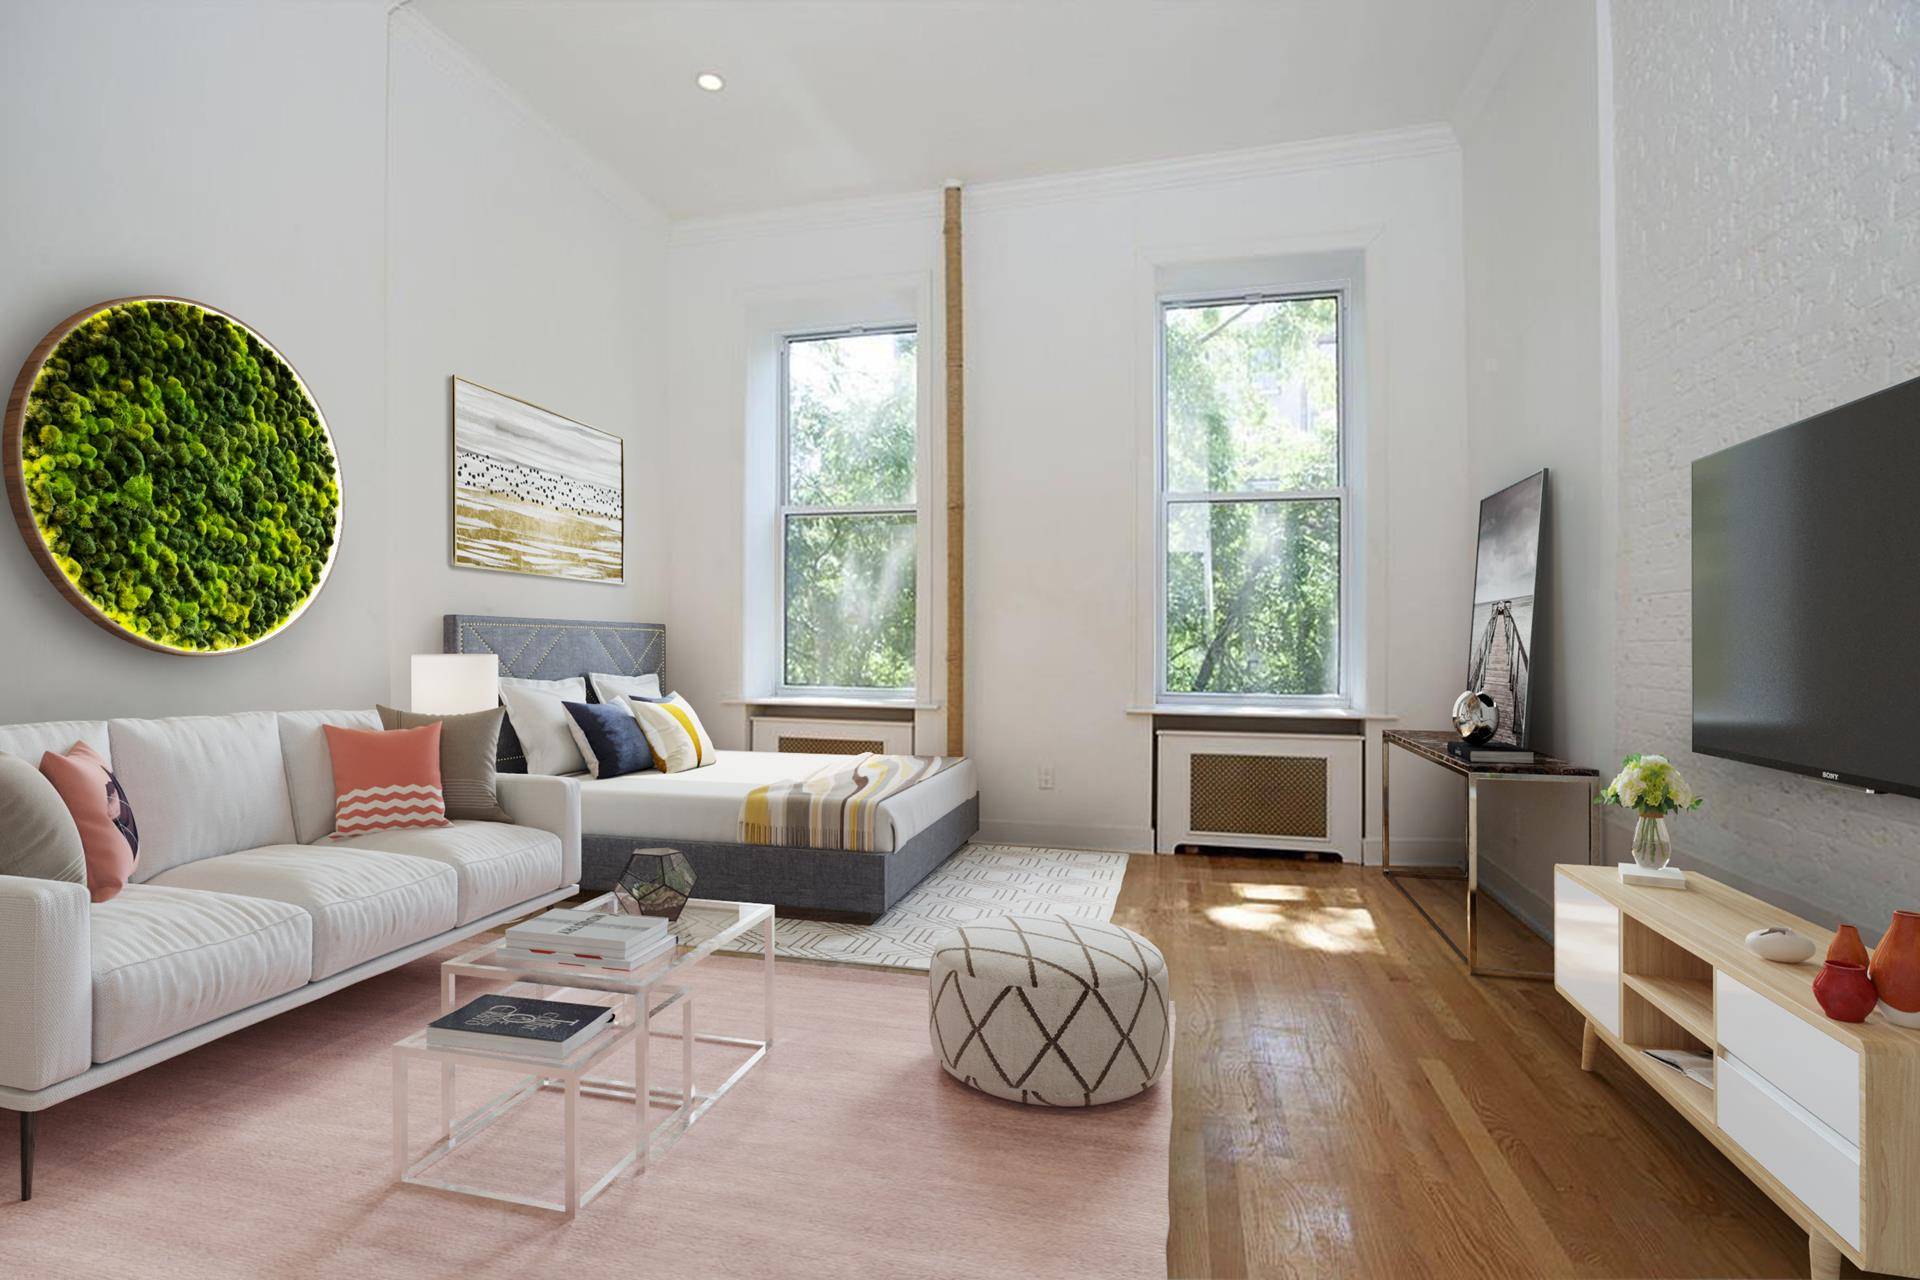 410 412 West 22nd Street are two Italianate townhouses located on a beautiful tree lined block in prime West Chelsea.